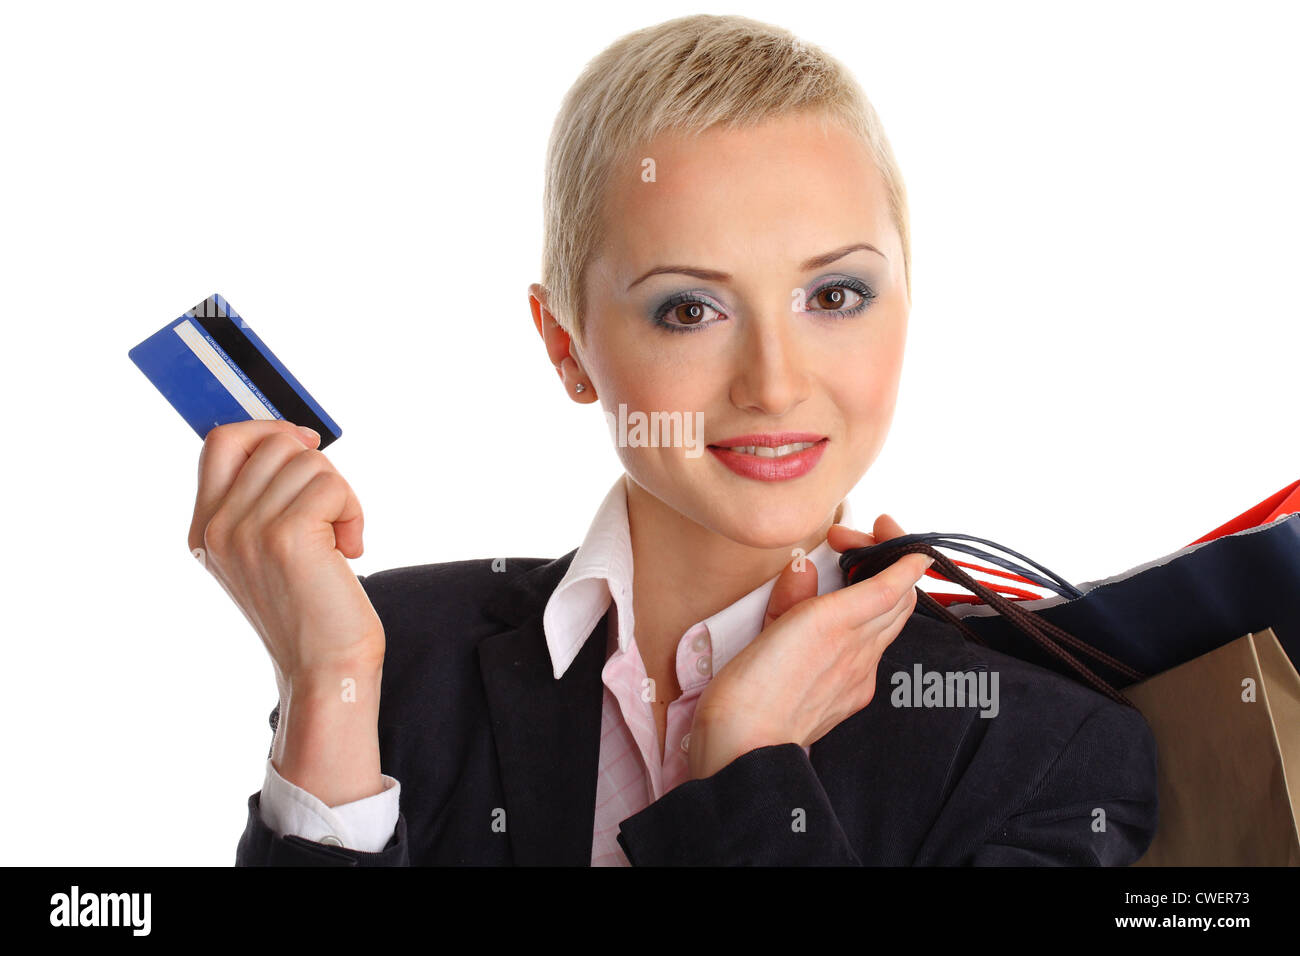 isolated on white of young woman with short hair and make-up professionally done, holding a shopping bags and credit card Stock Photo